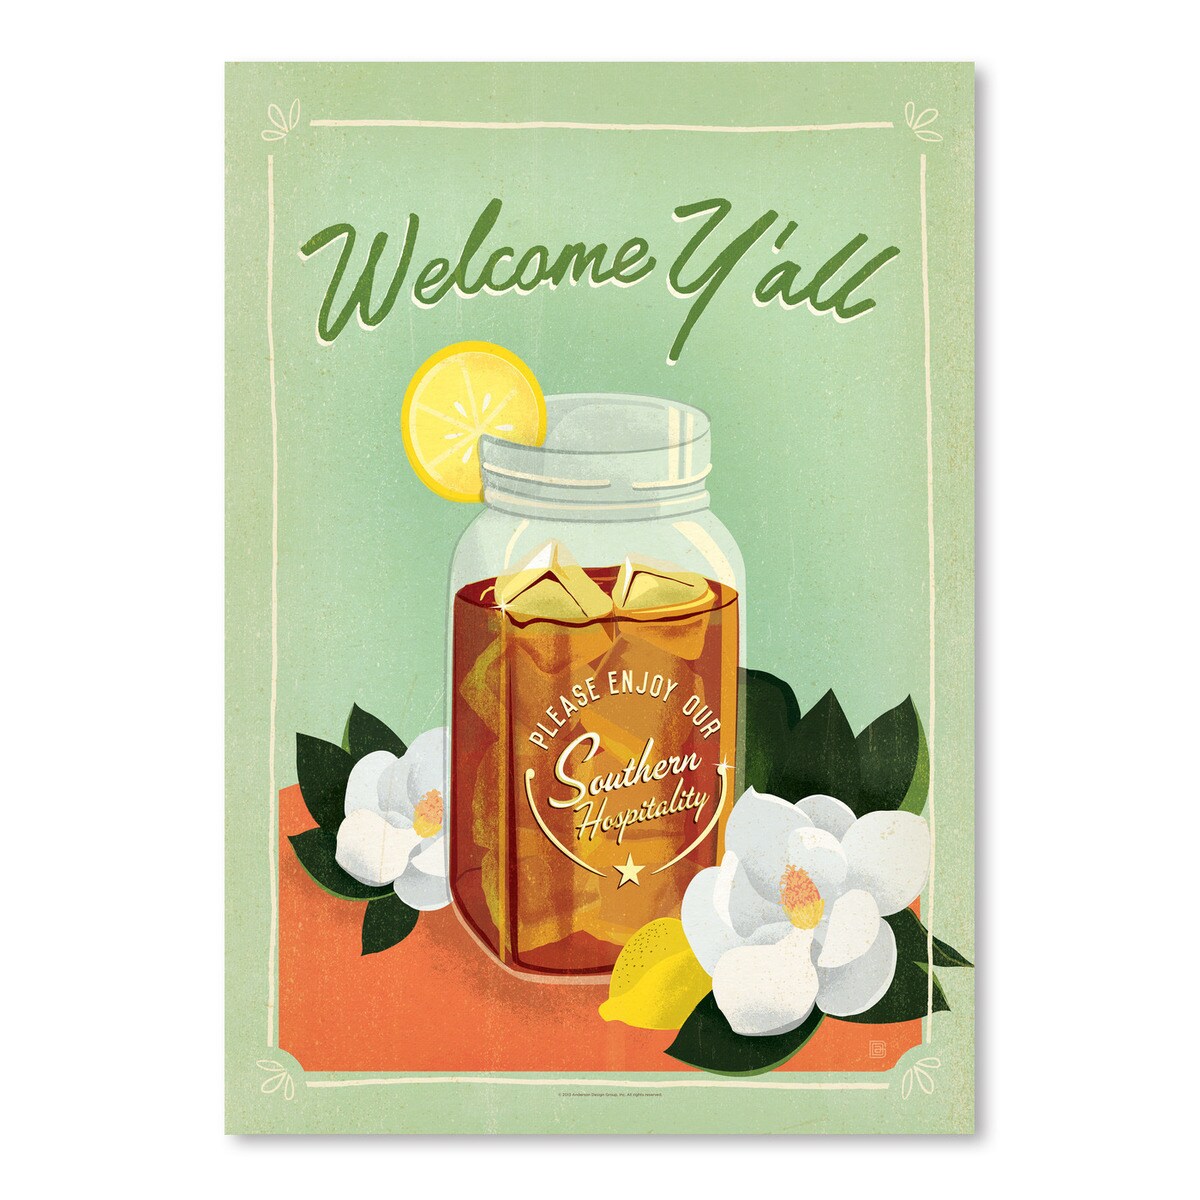 Welcome Yall Icetea by Anderson Design Group  Poster Art Print - Americanflat